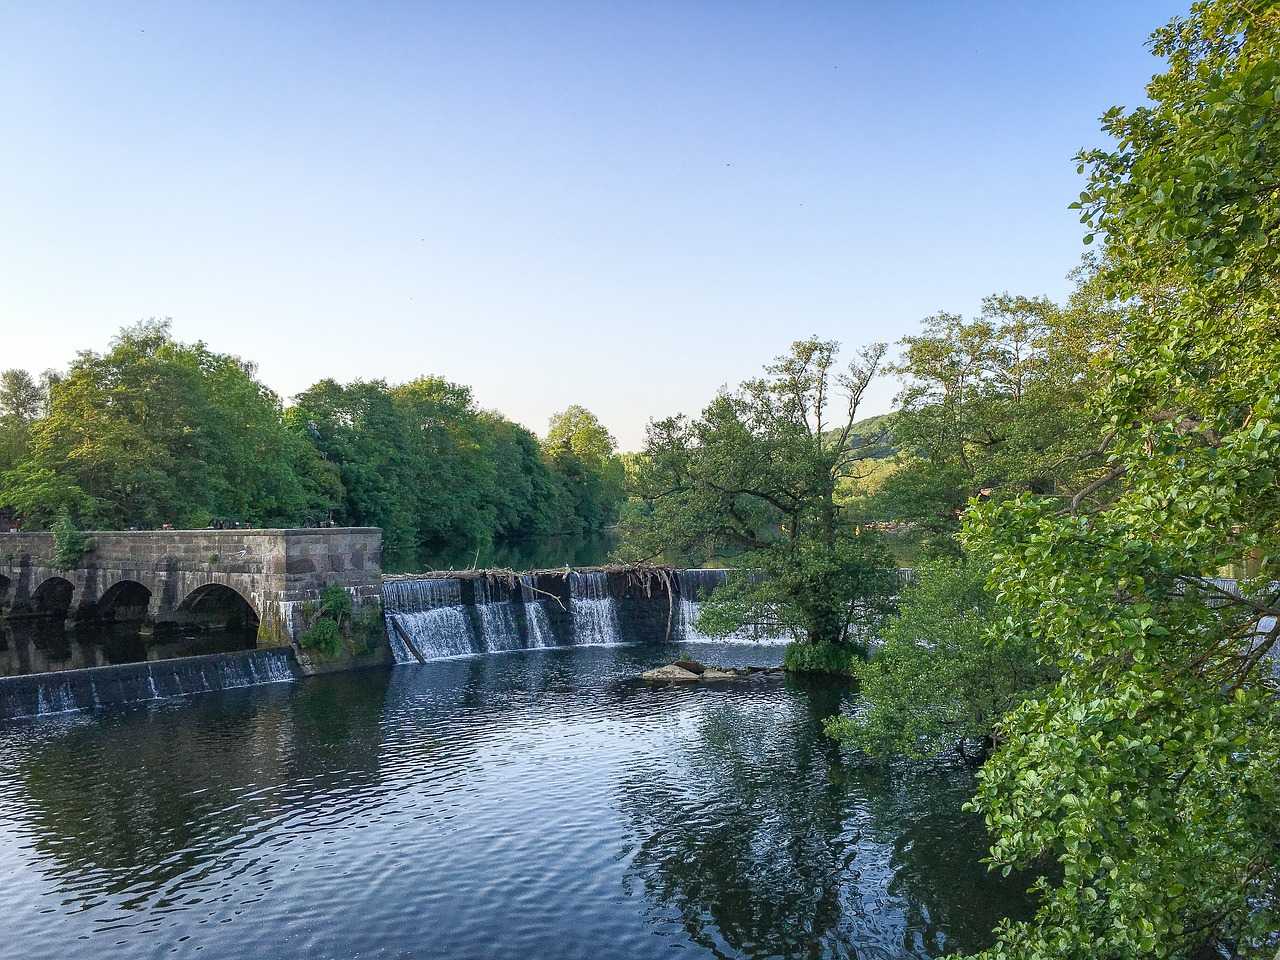 Explore Derbyshire’s hidden corners with our favourite six places by the water (Rhys Adams on pixabay)